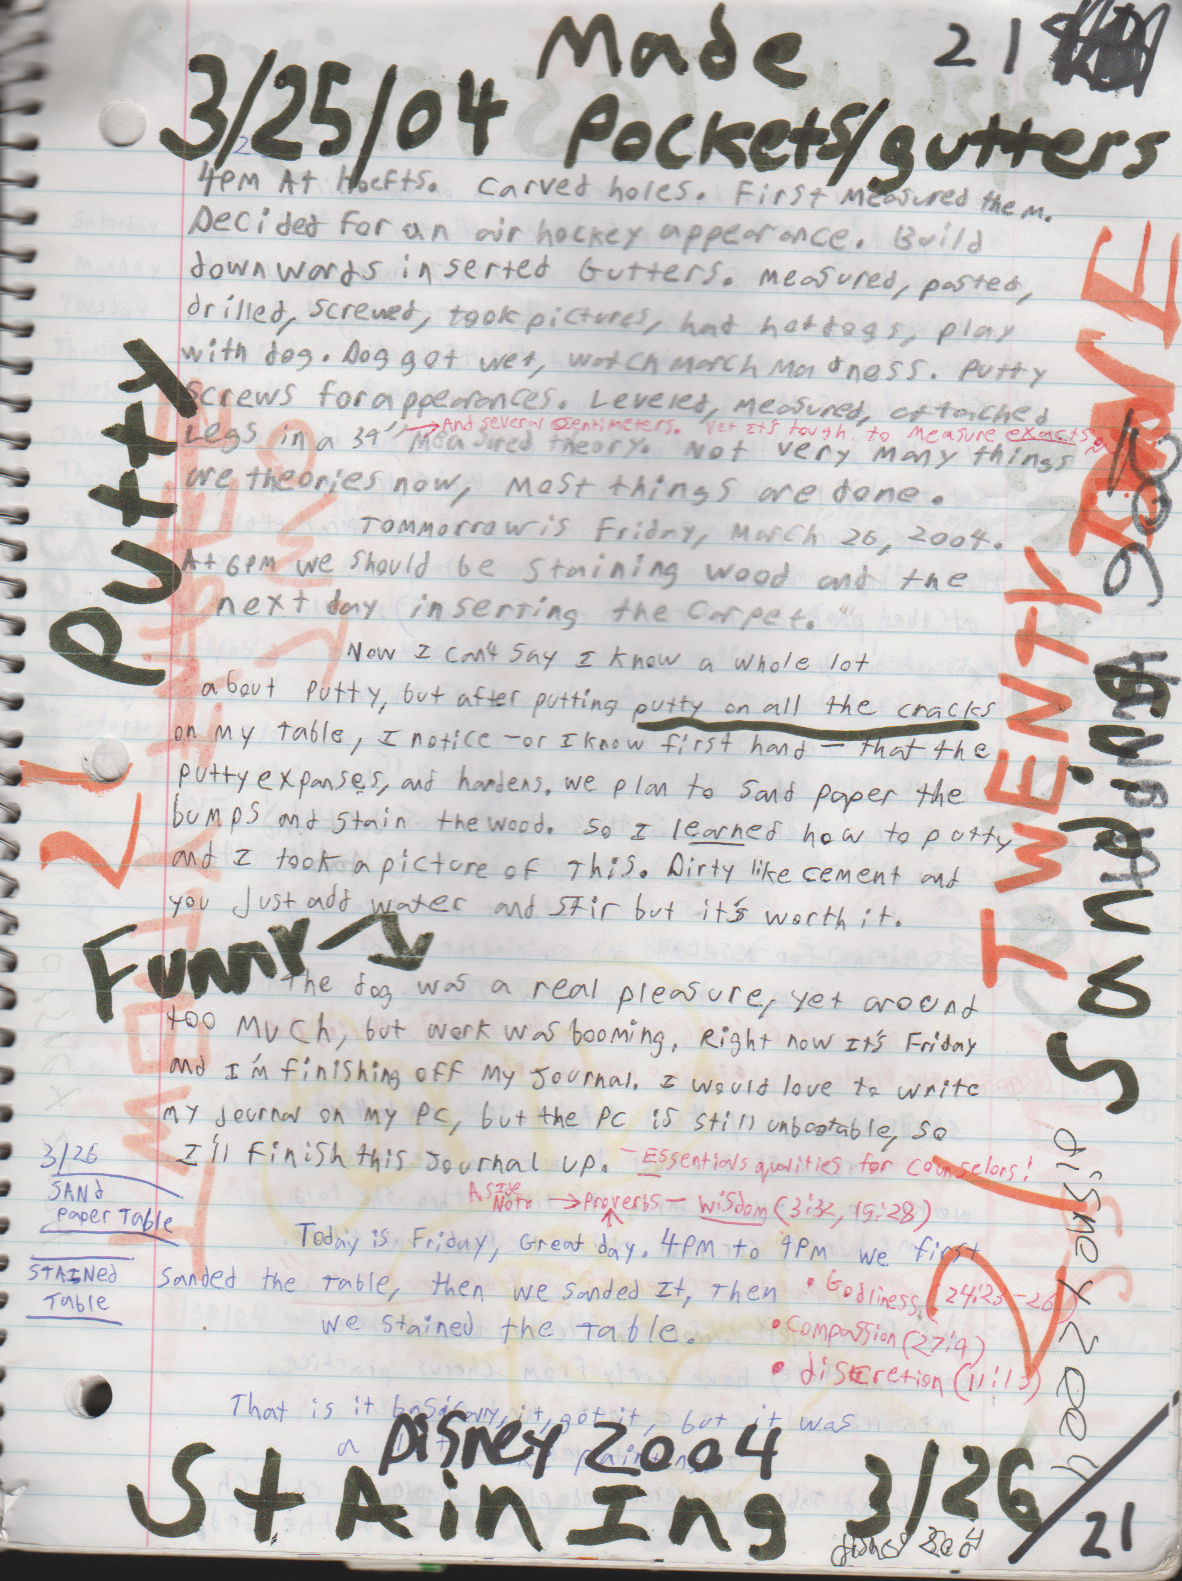 2004-01-29 - Thursday - Carpetball FGHS Senior Project Journal, Joey Arnold, Part 02, 96pages numbered, Notebook-16.png